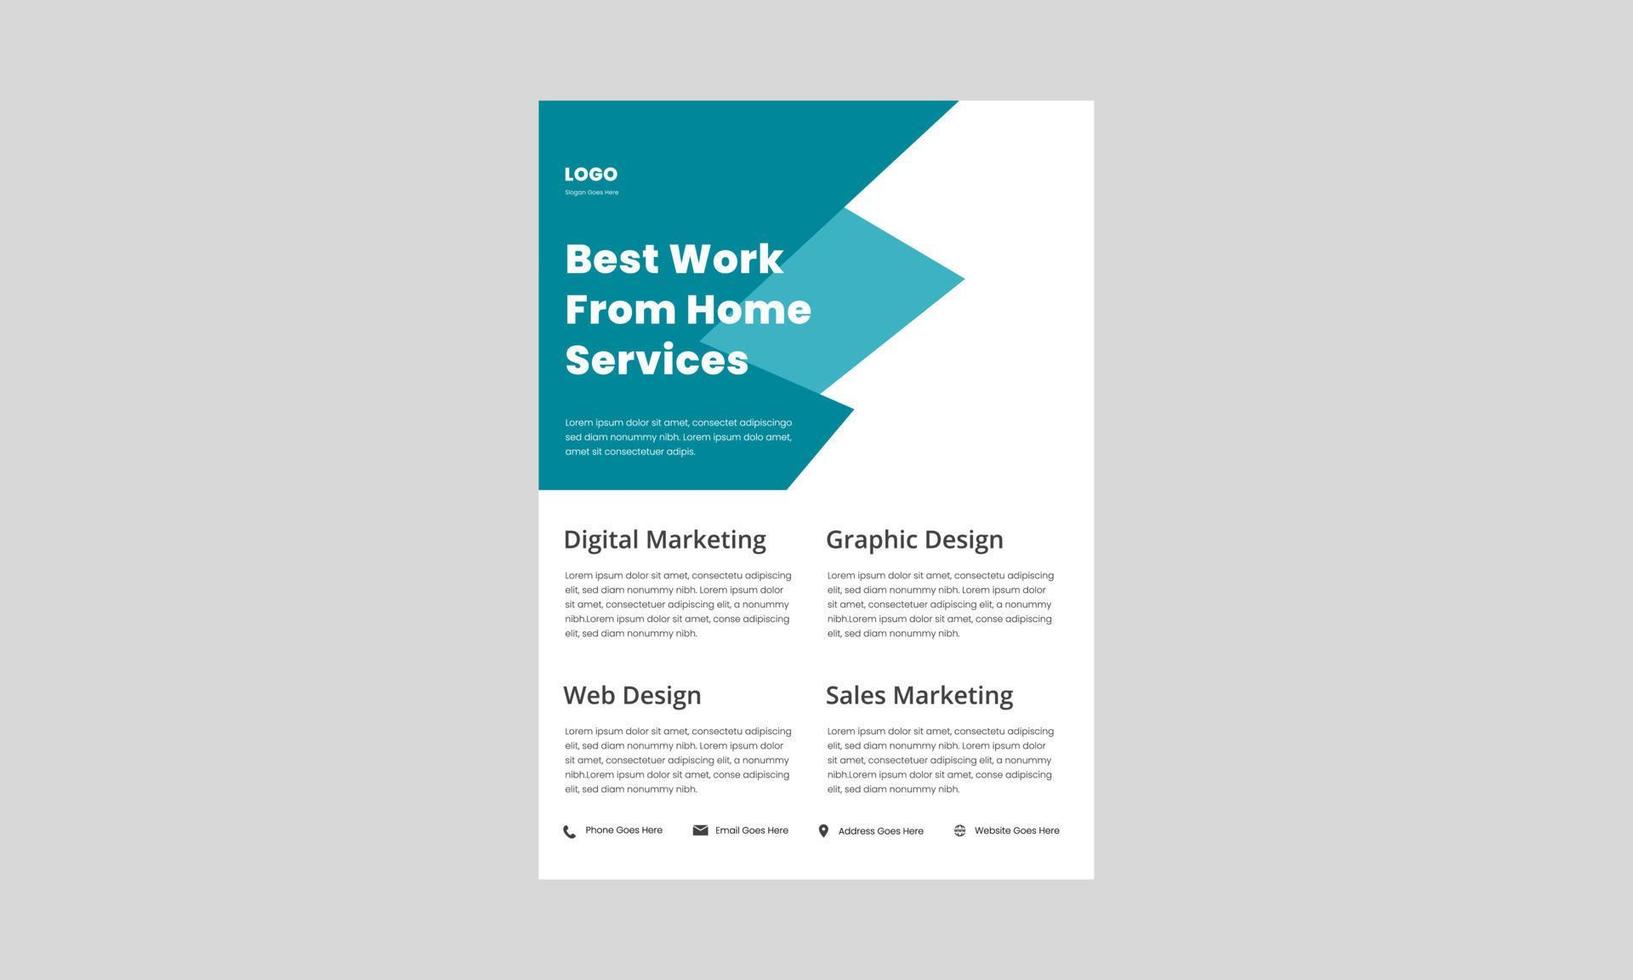 work from home flyer design template. working from home poster, leaflet design. vector